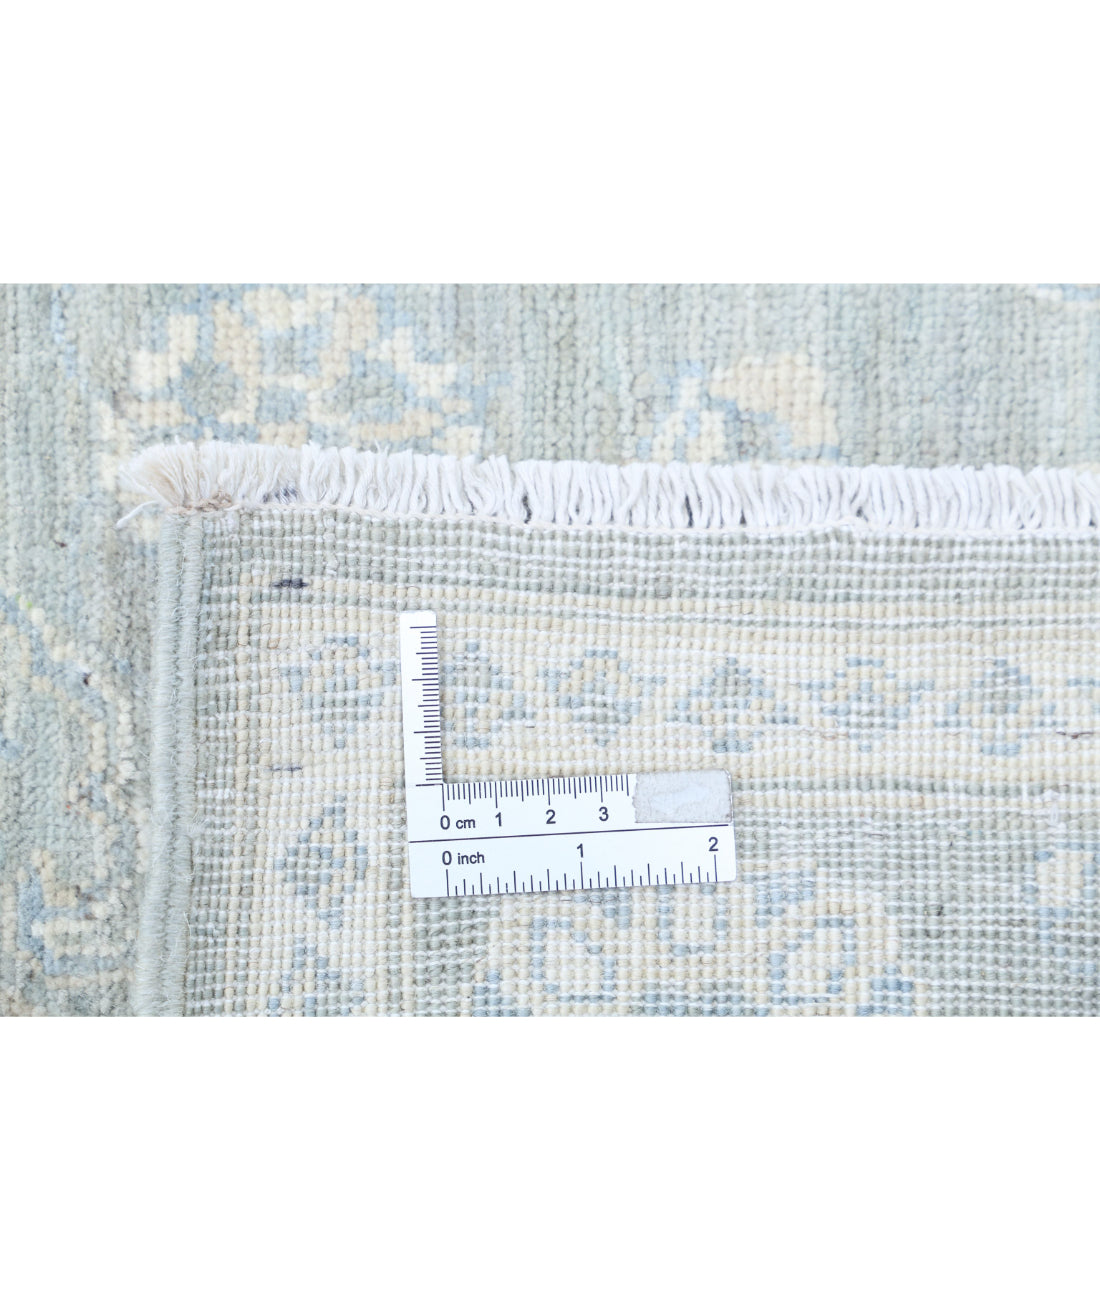 Serenity 4'0'' X 14'3'' Hand-Knotted Wool Rug 4'0'' x 14'3'' (120 X 428) / Grey / Blue